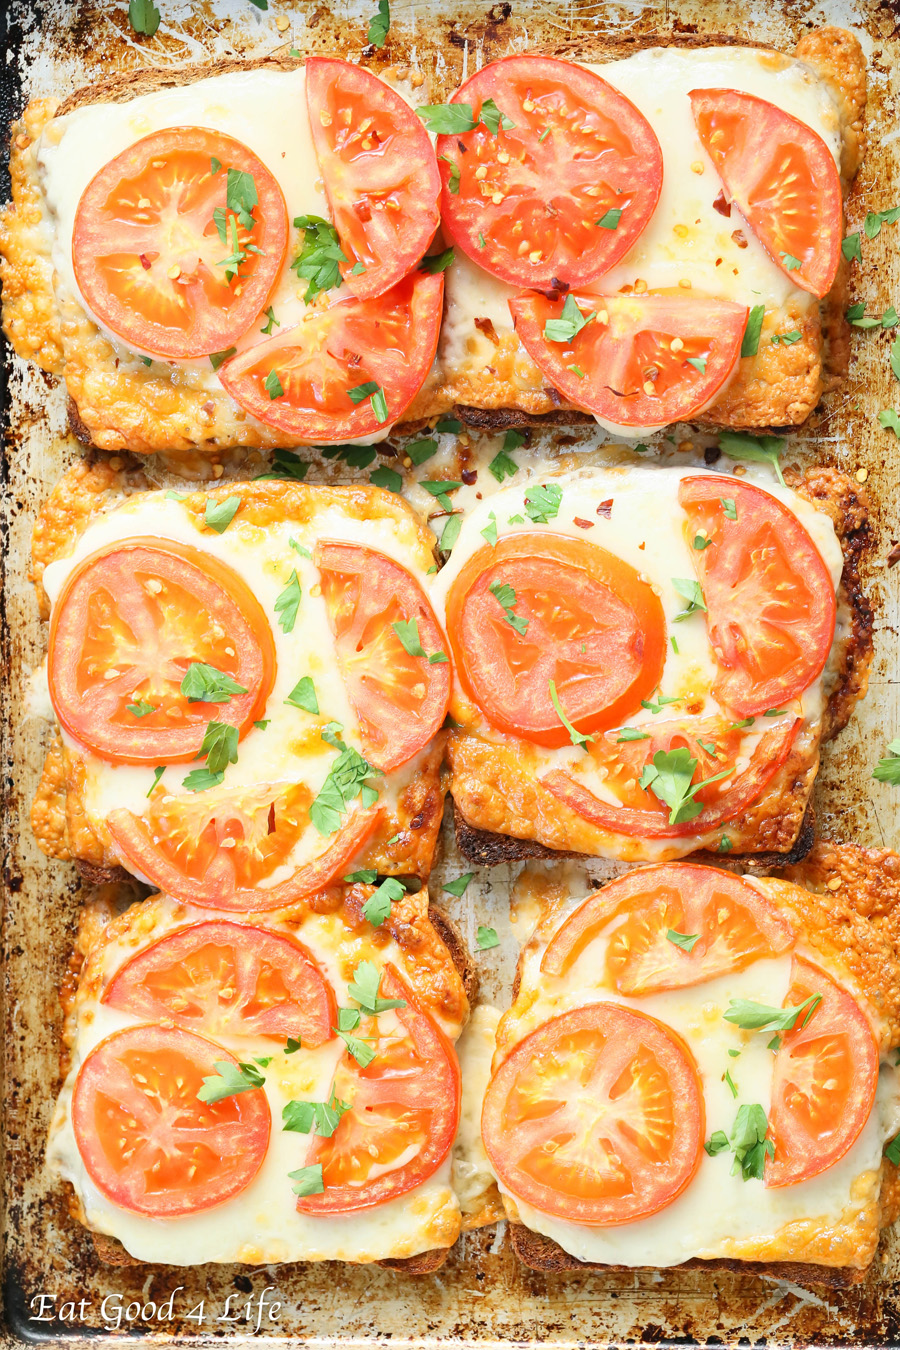 13. Super Easy Tomato Cheese Toasts